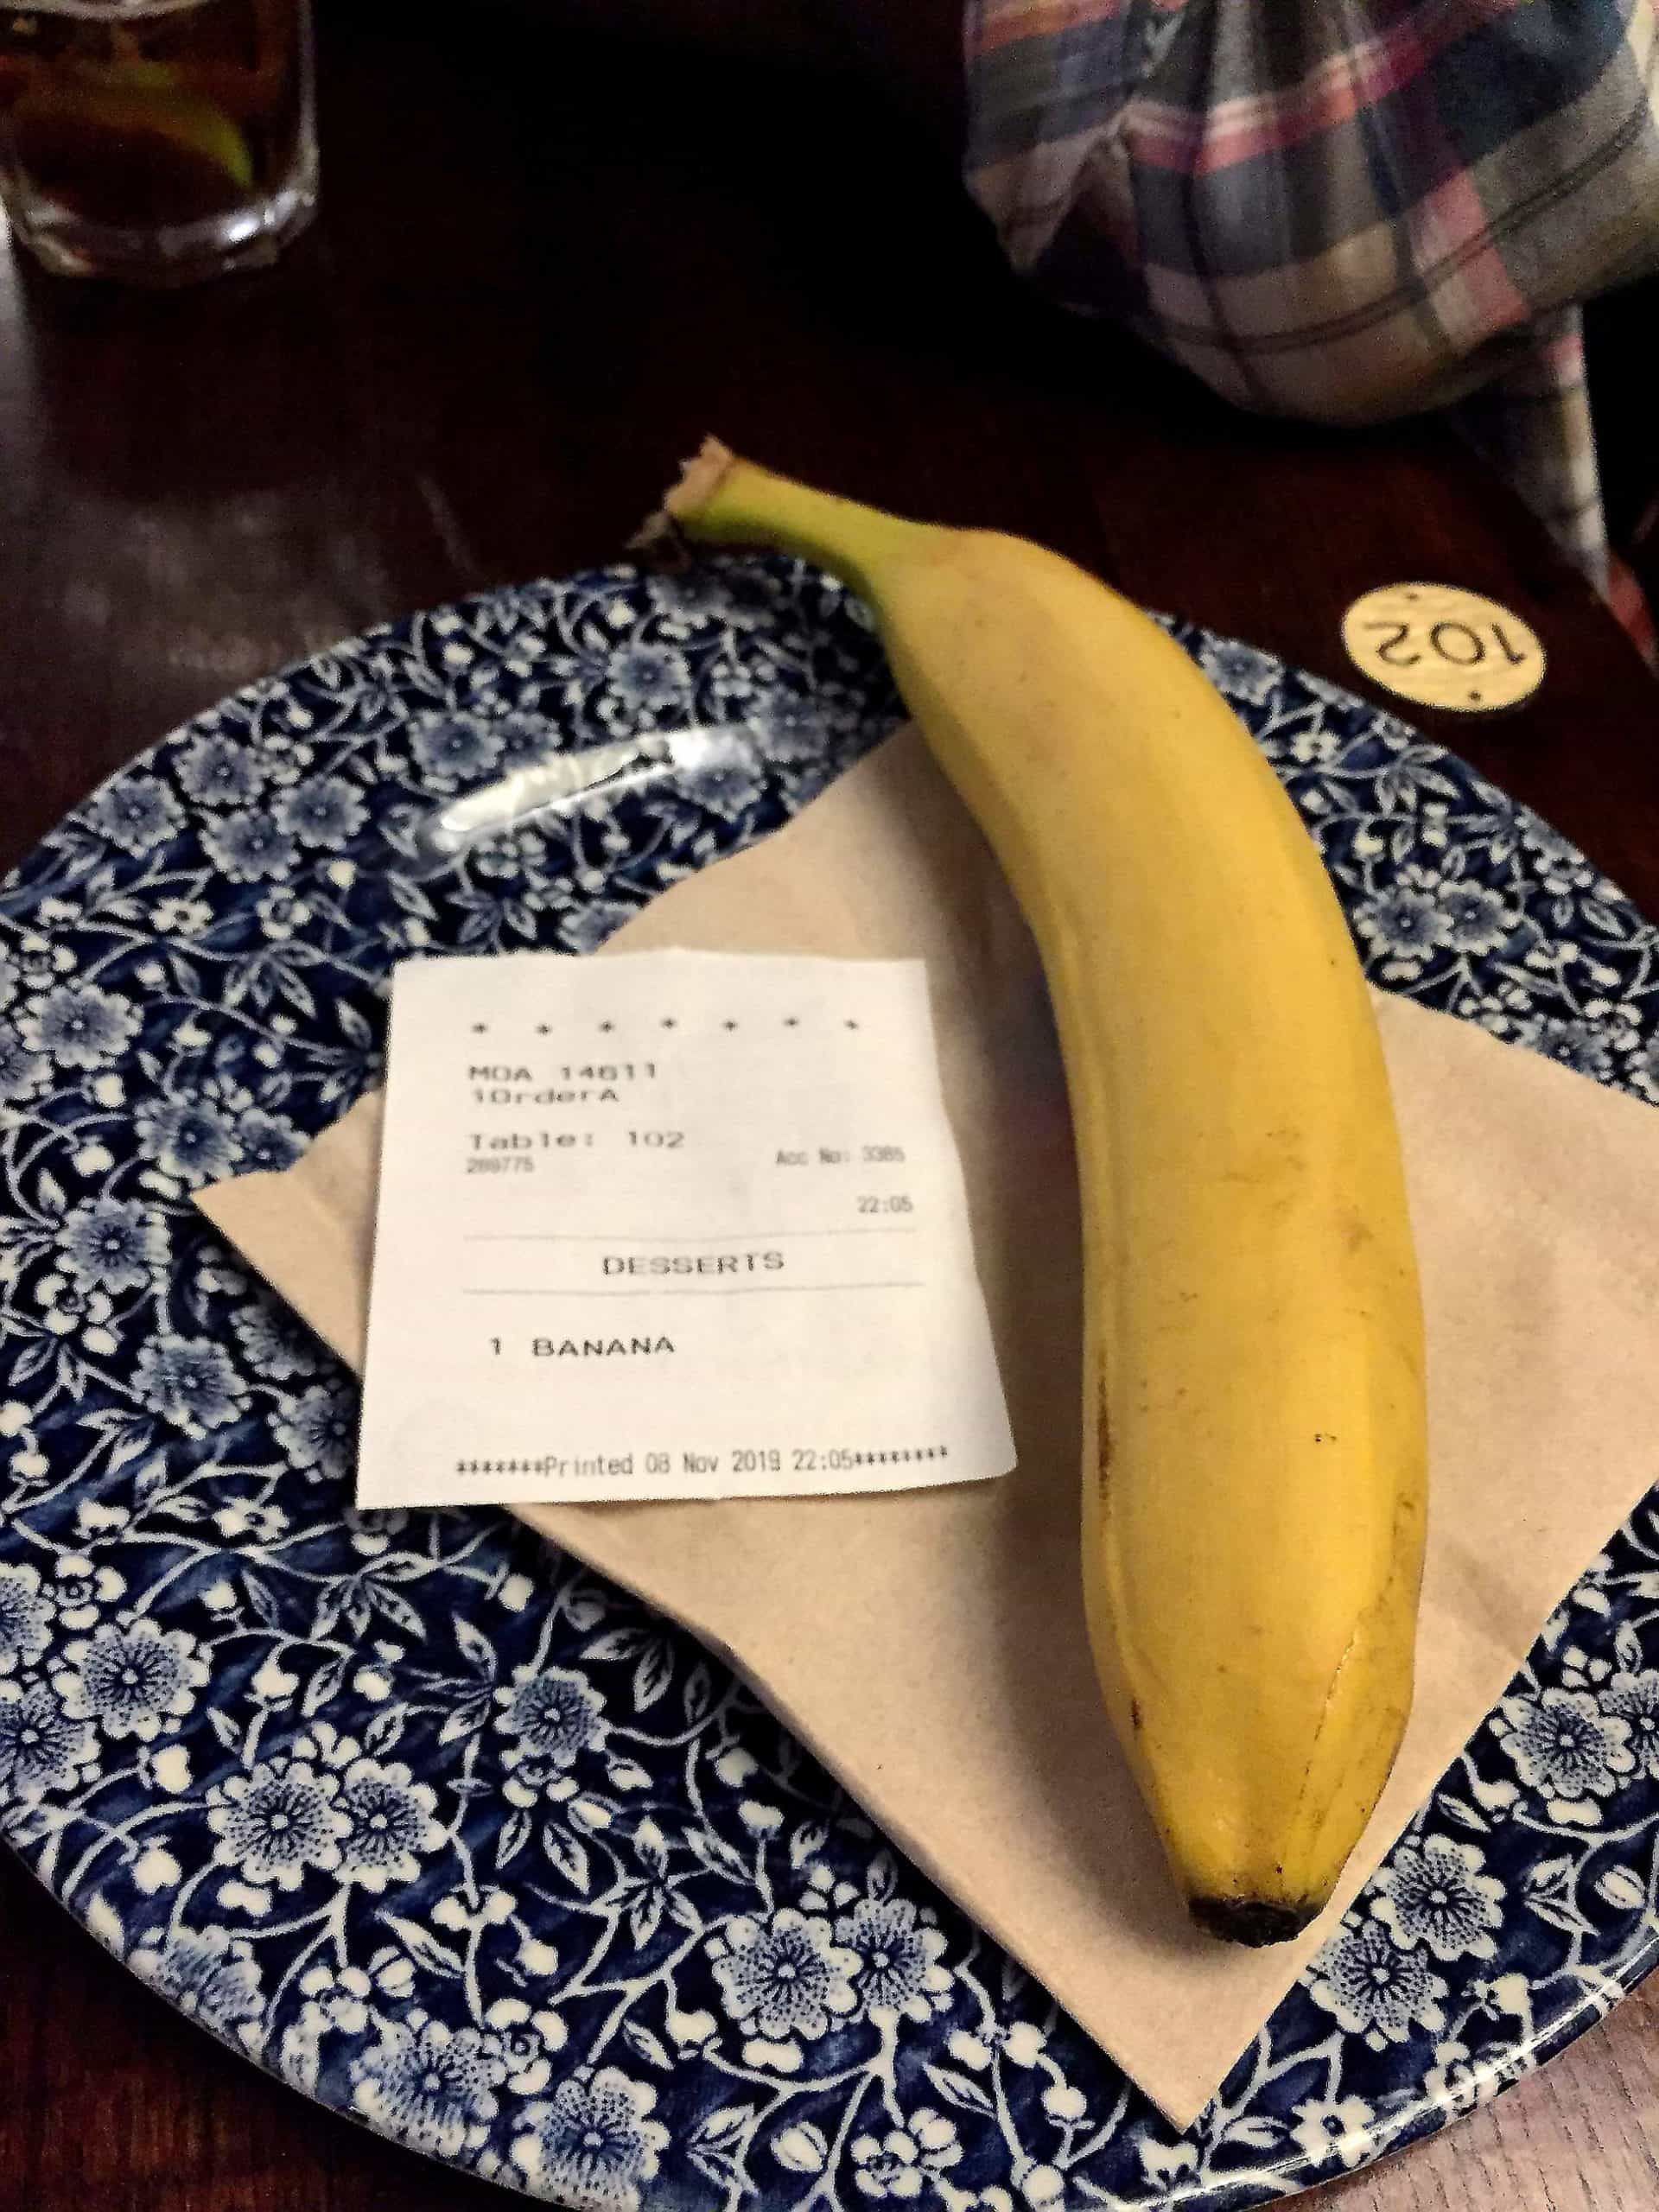 Man convicted of racist offence after sending banana to black man using Wetherspoons app